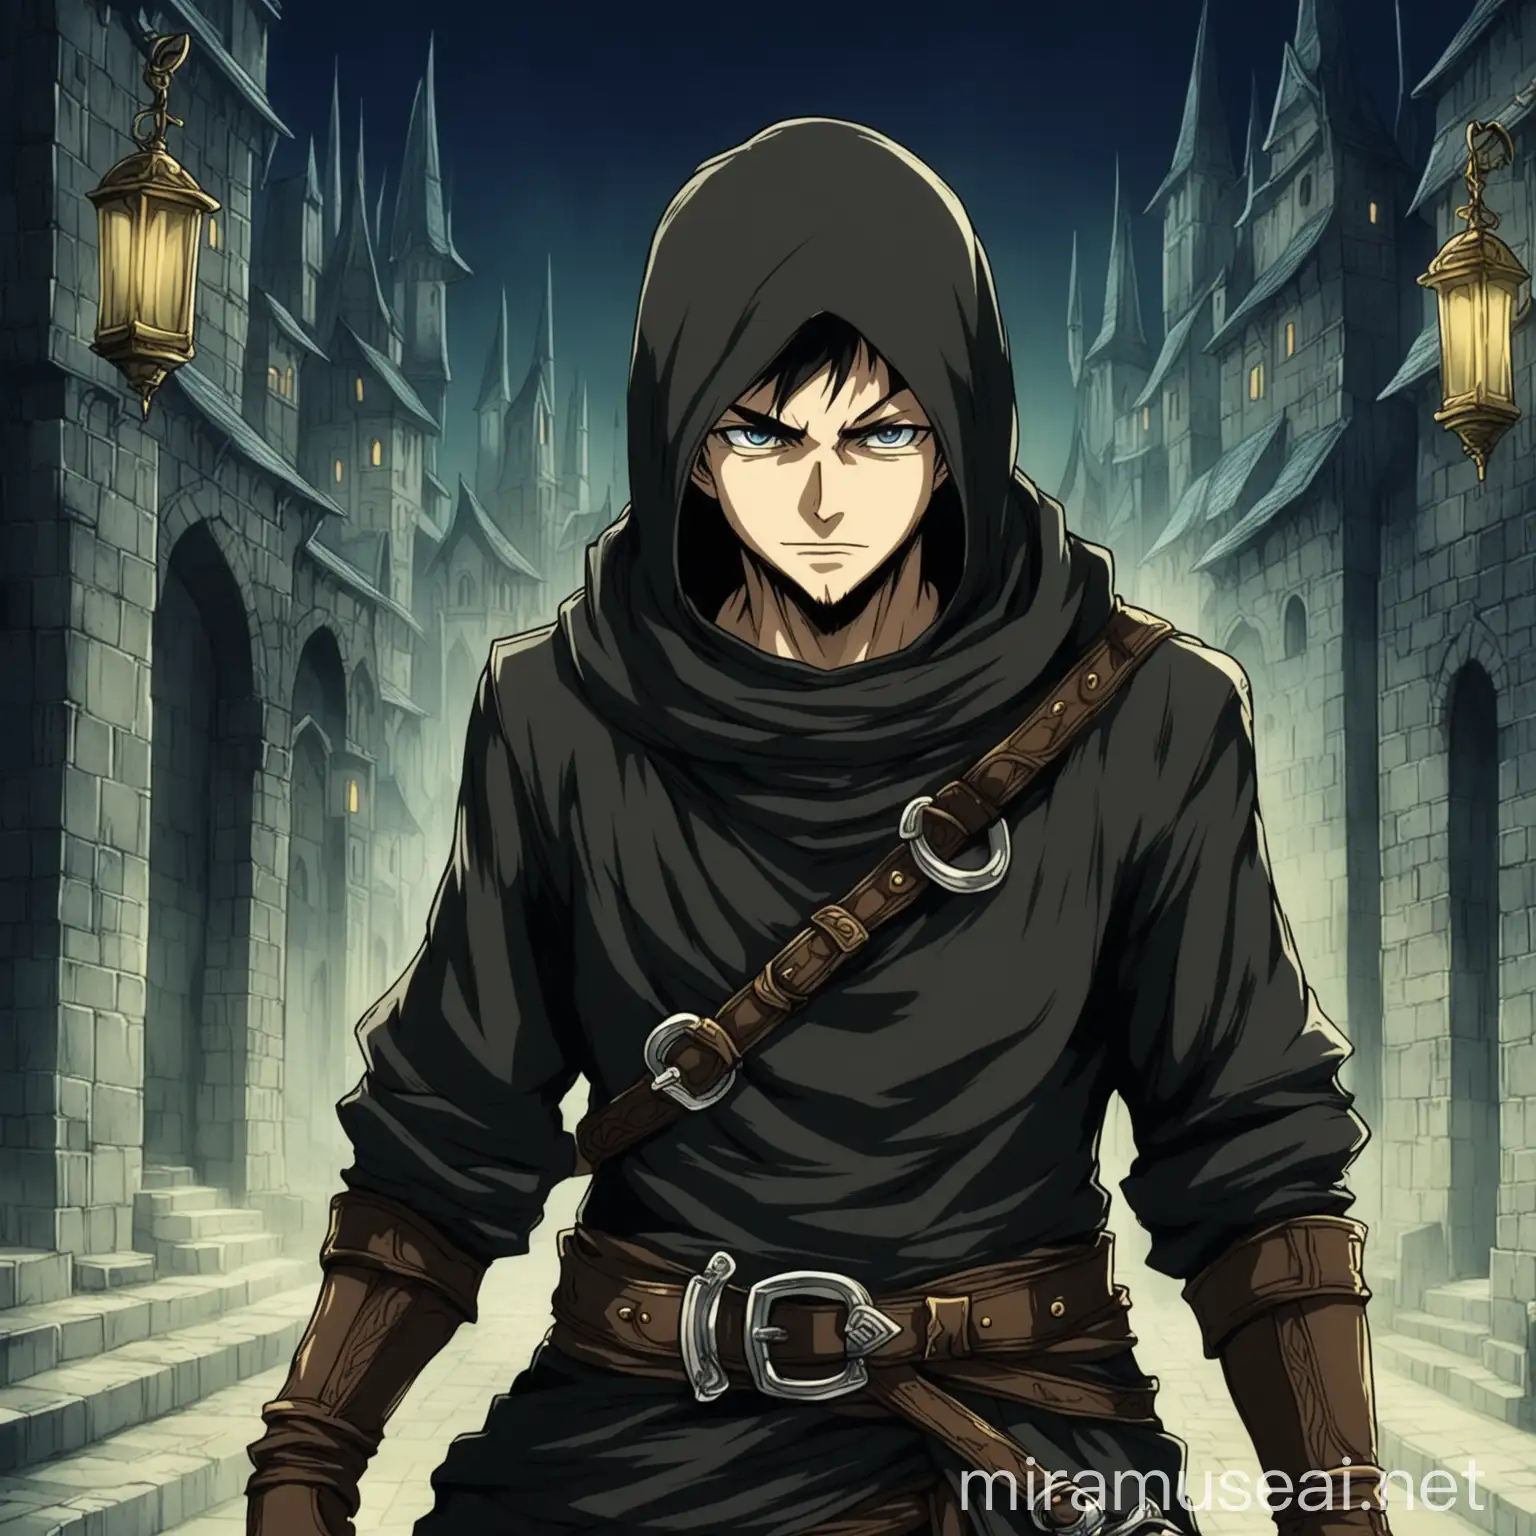 a thief in fantasy style, in anime